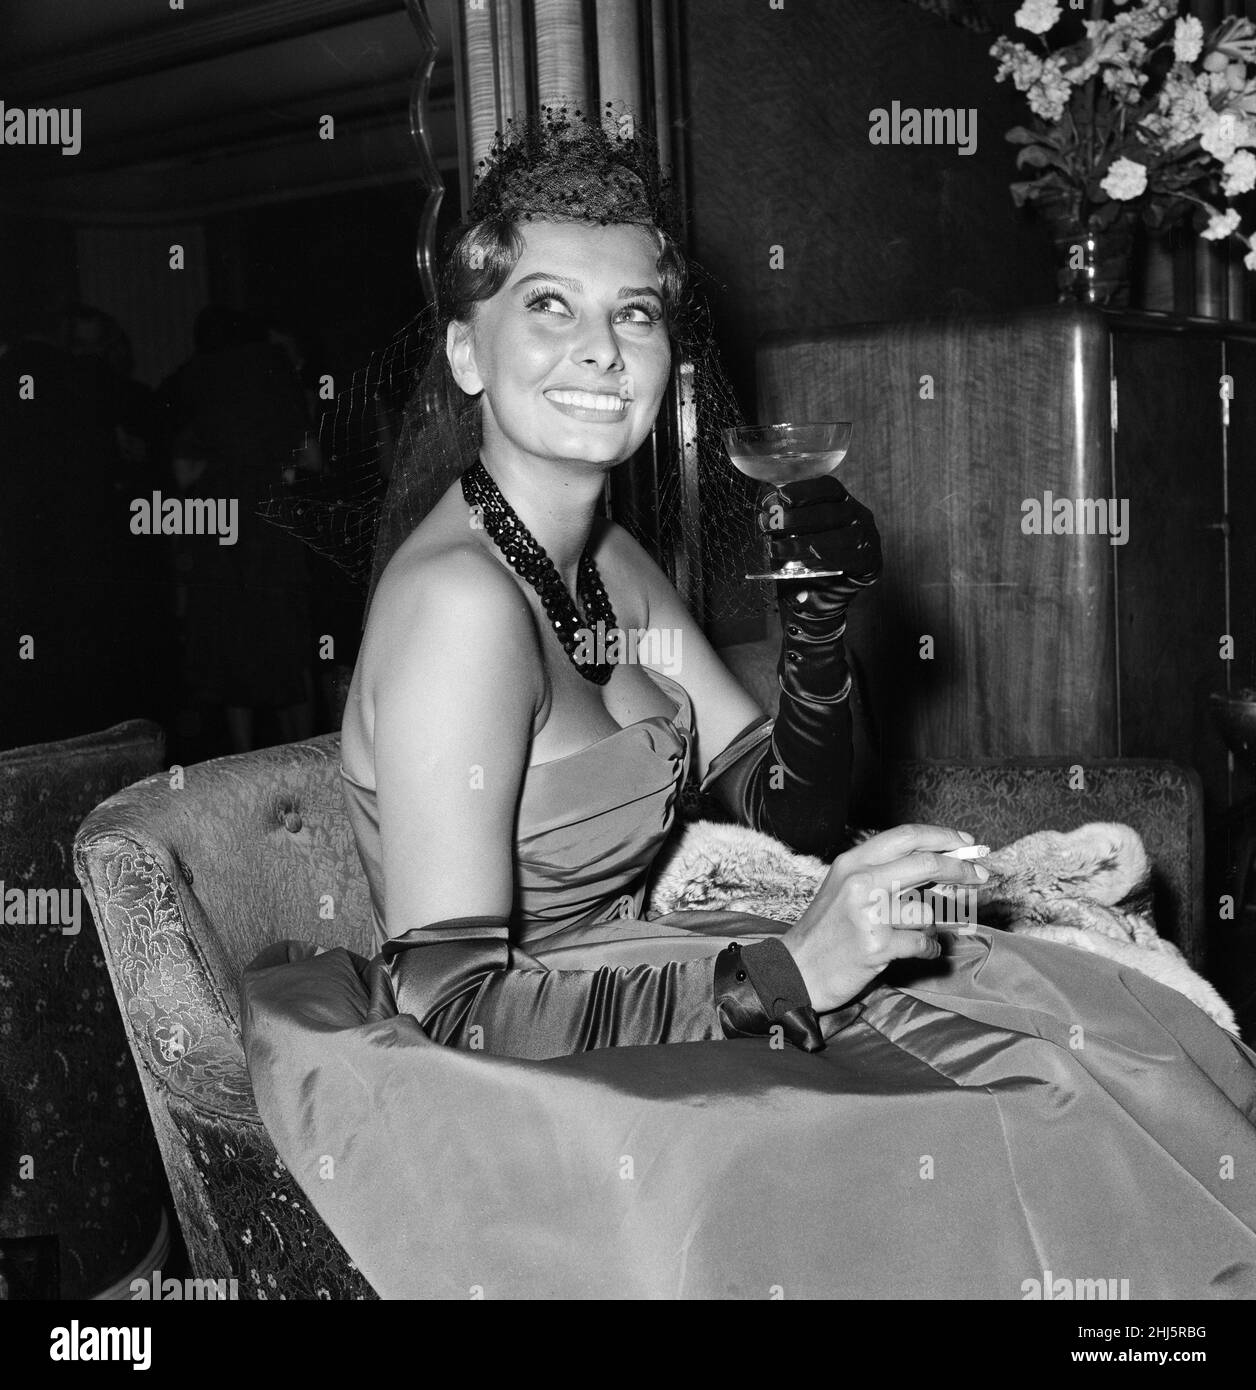 Variety Club charity premier of 'The Key', Odeon Leicester Square, London. The Key is a 1958 British war film set in 1941 during the Battle of the Atlantic. Pictured, Sophia Loren, one of the stars of the film, with a glass of champagne. 29th May 1958. Stock Photo